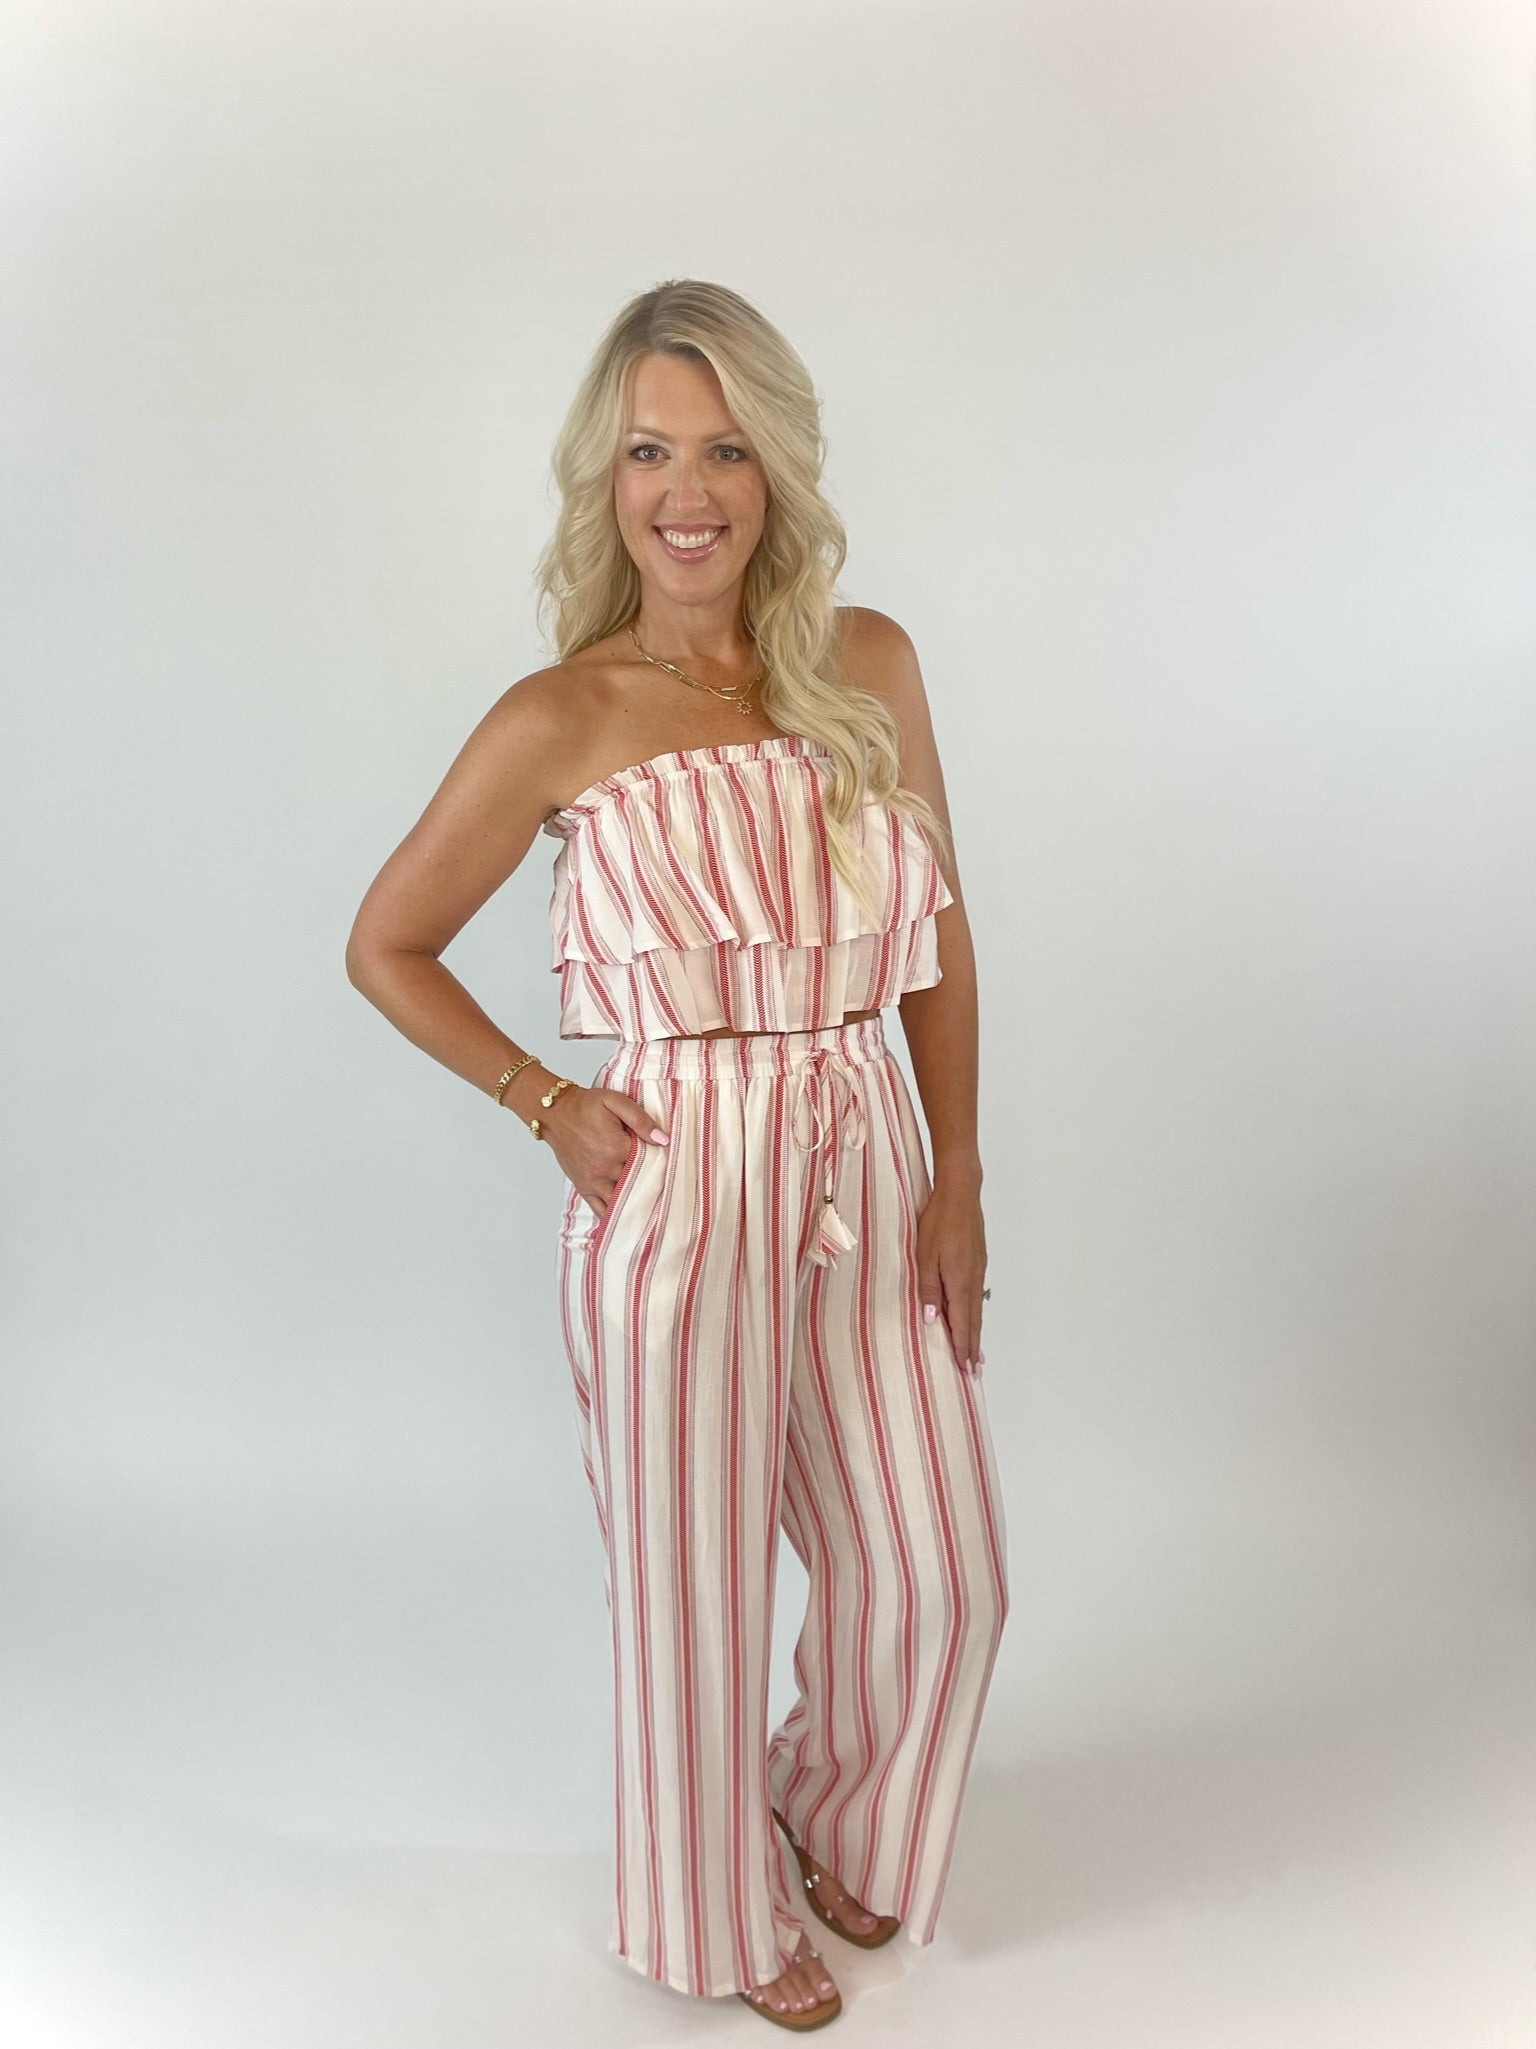 All About The Look White & Red Striped Pants